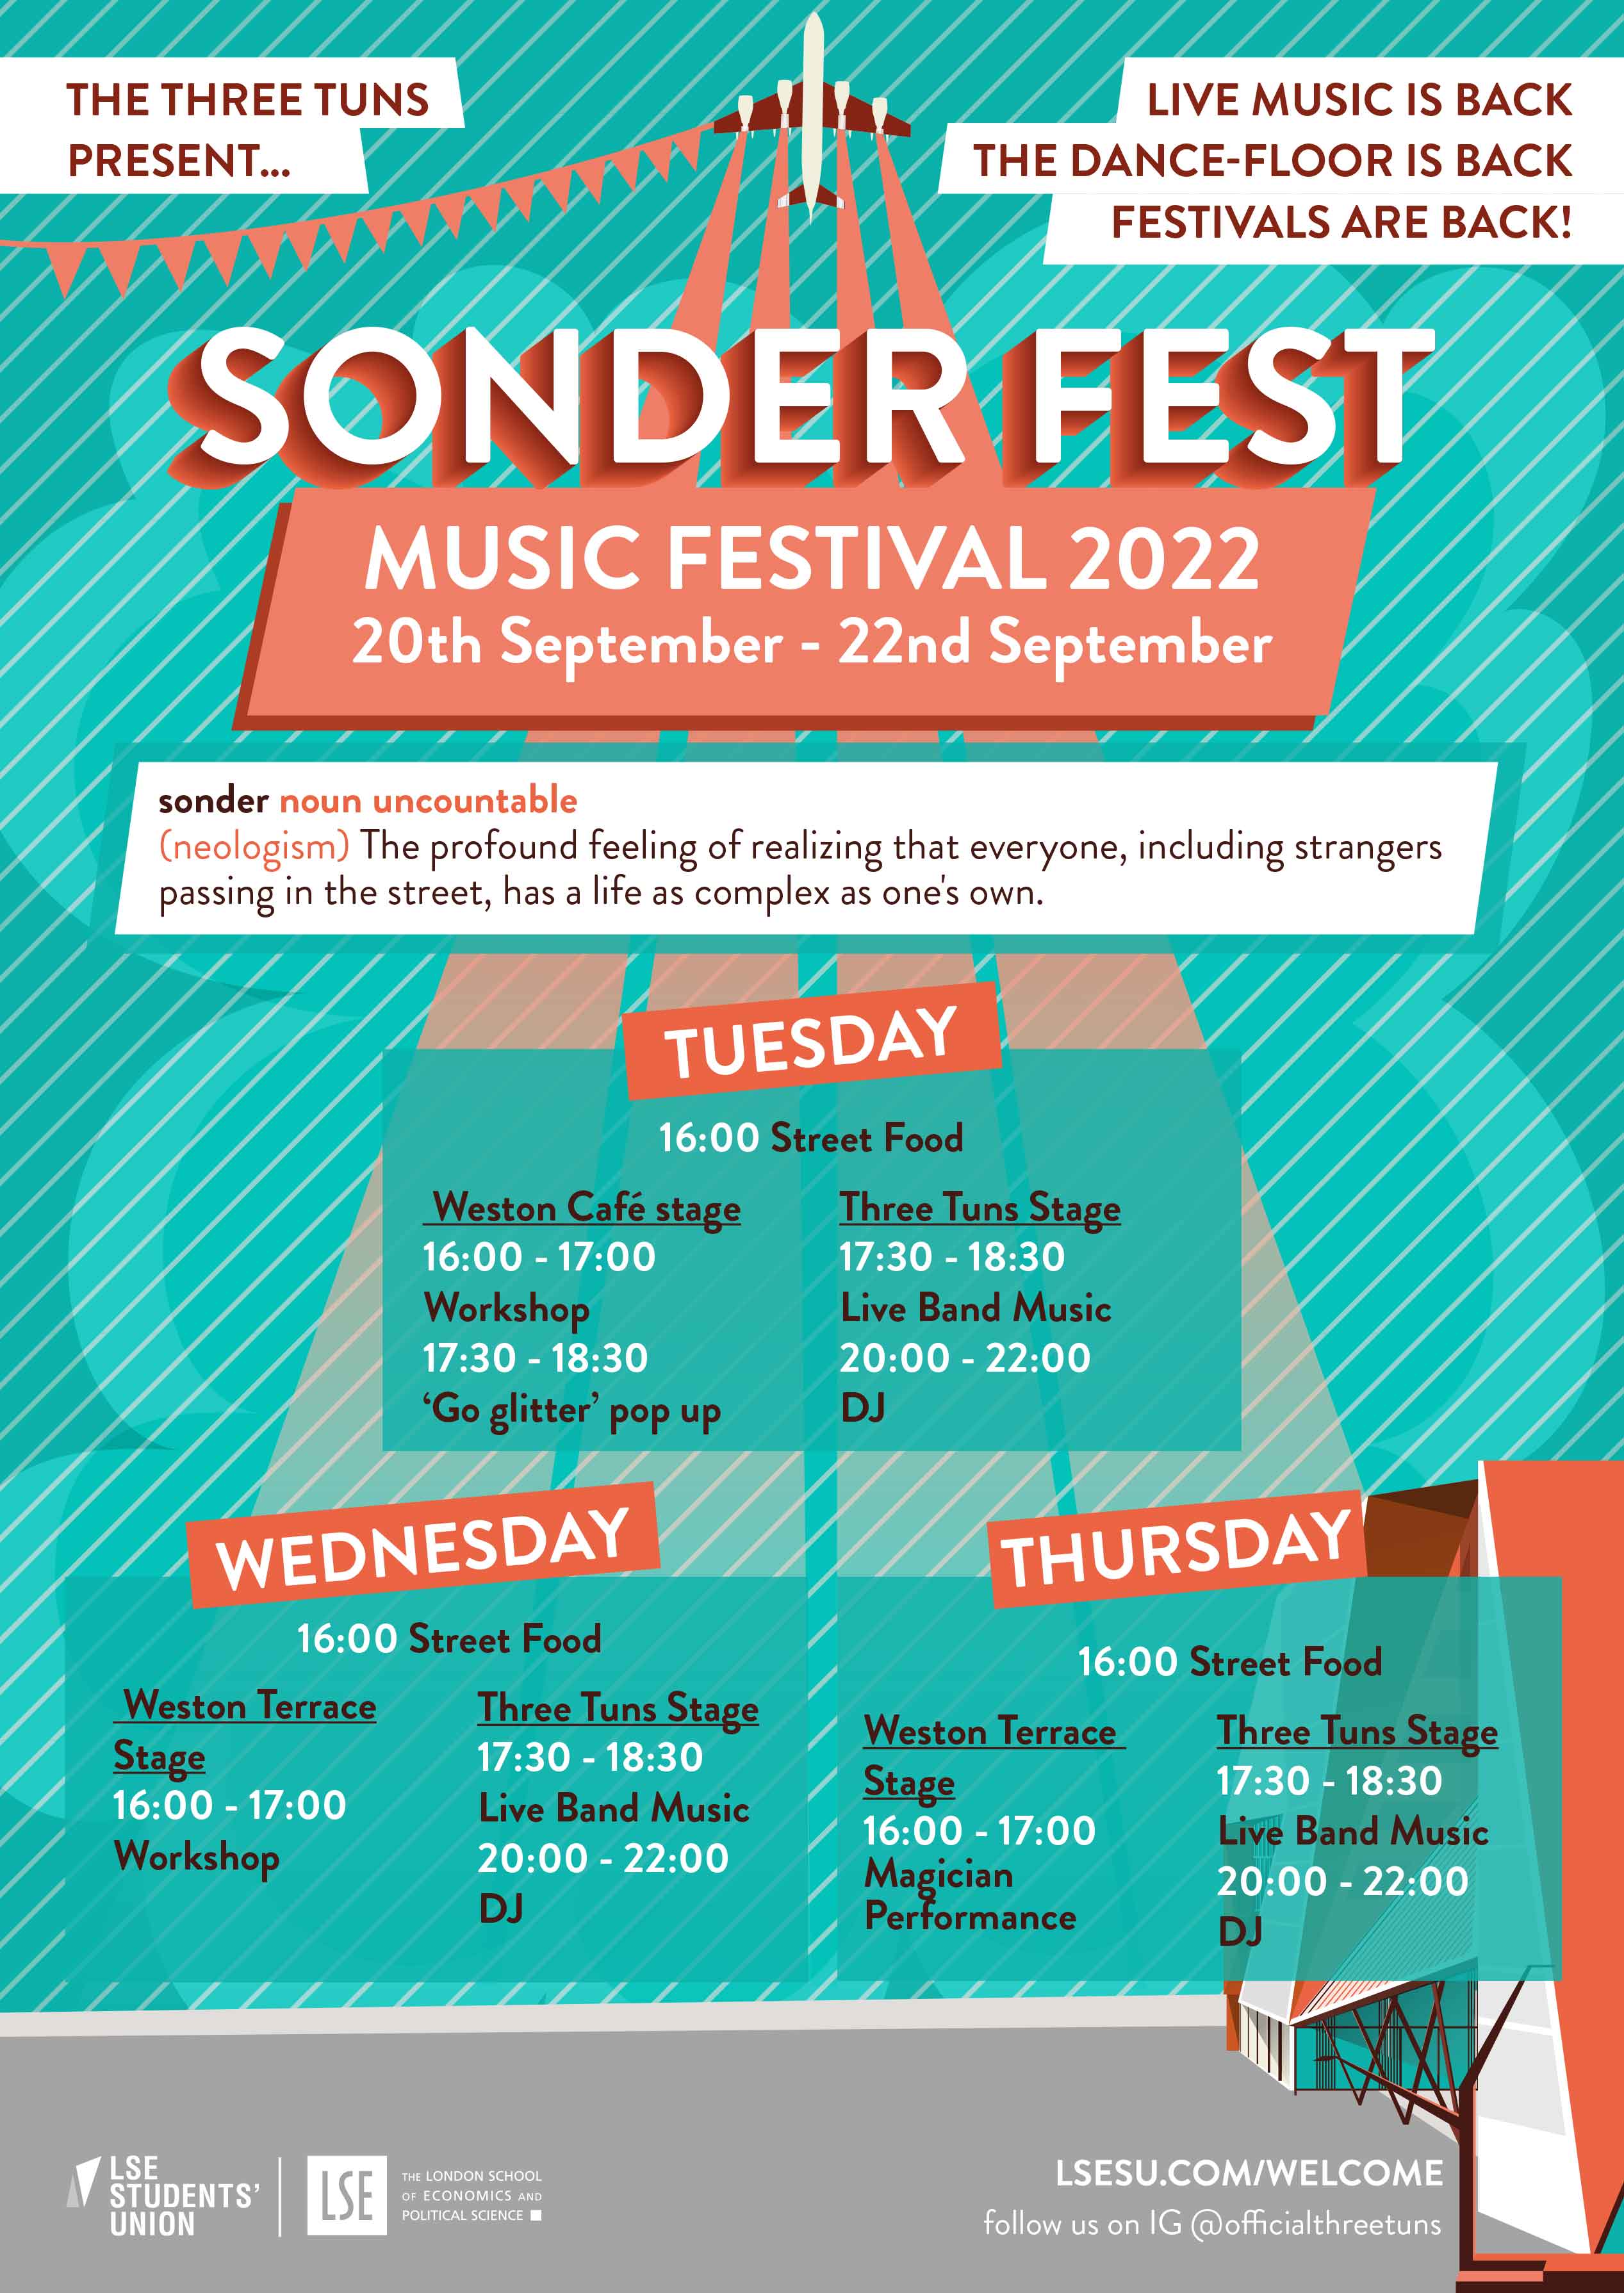 The Three Tuns presents Sonderfest, with live music across three days and multiple stages